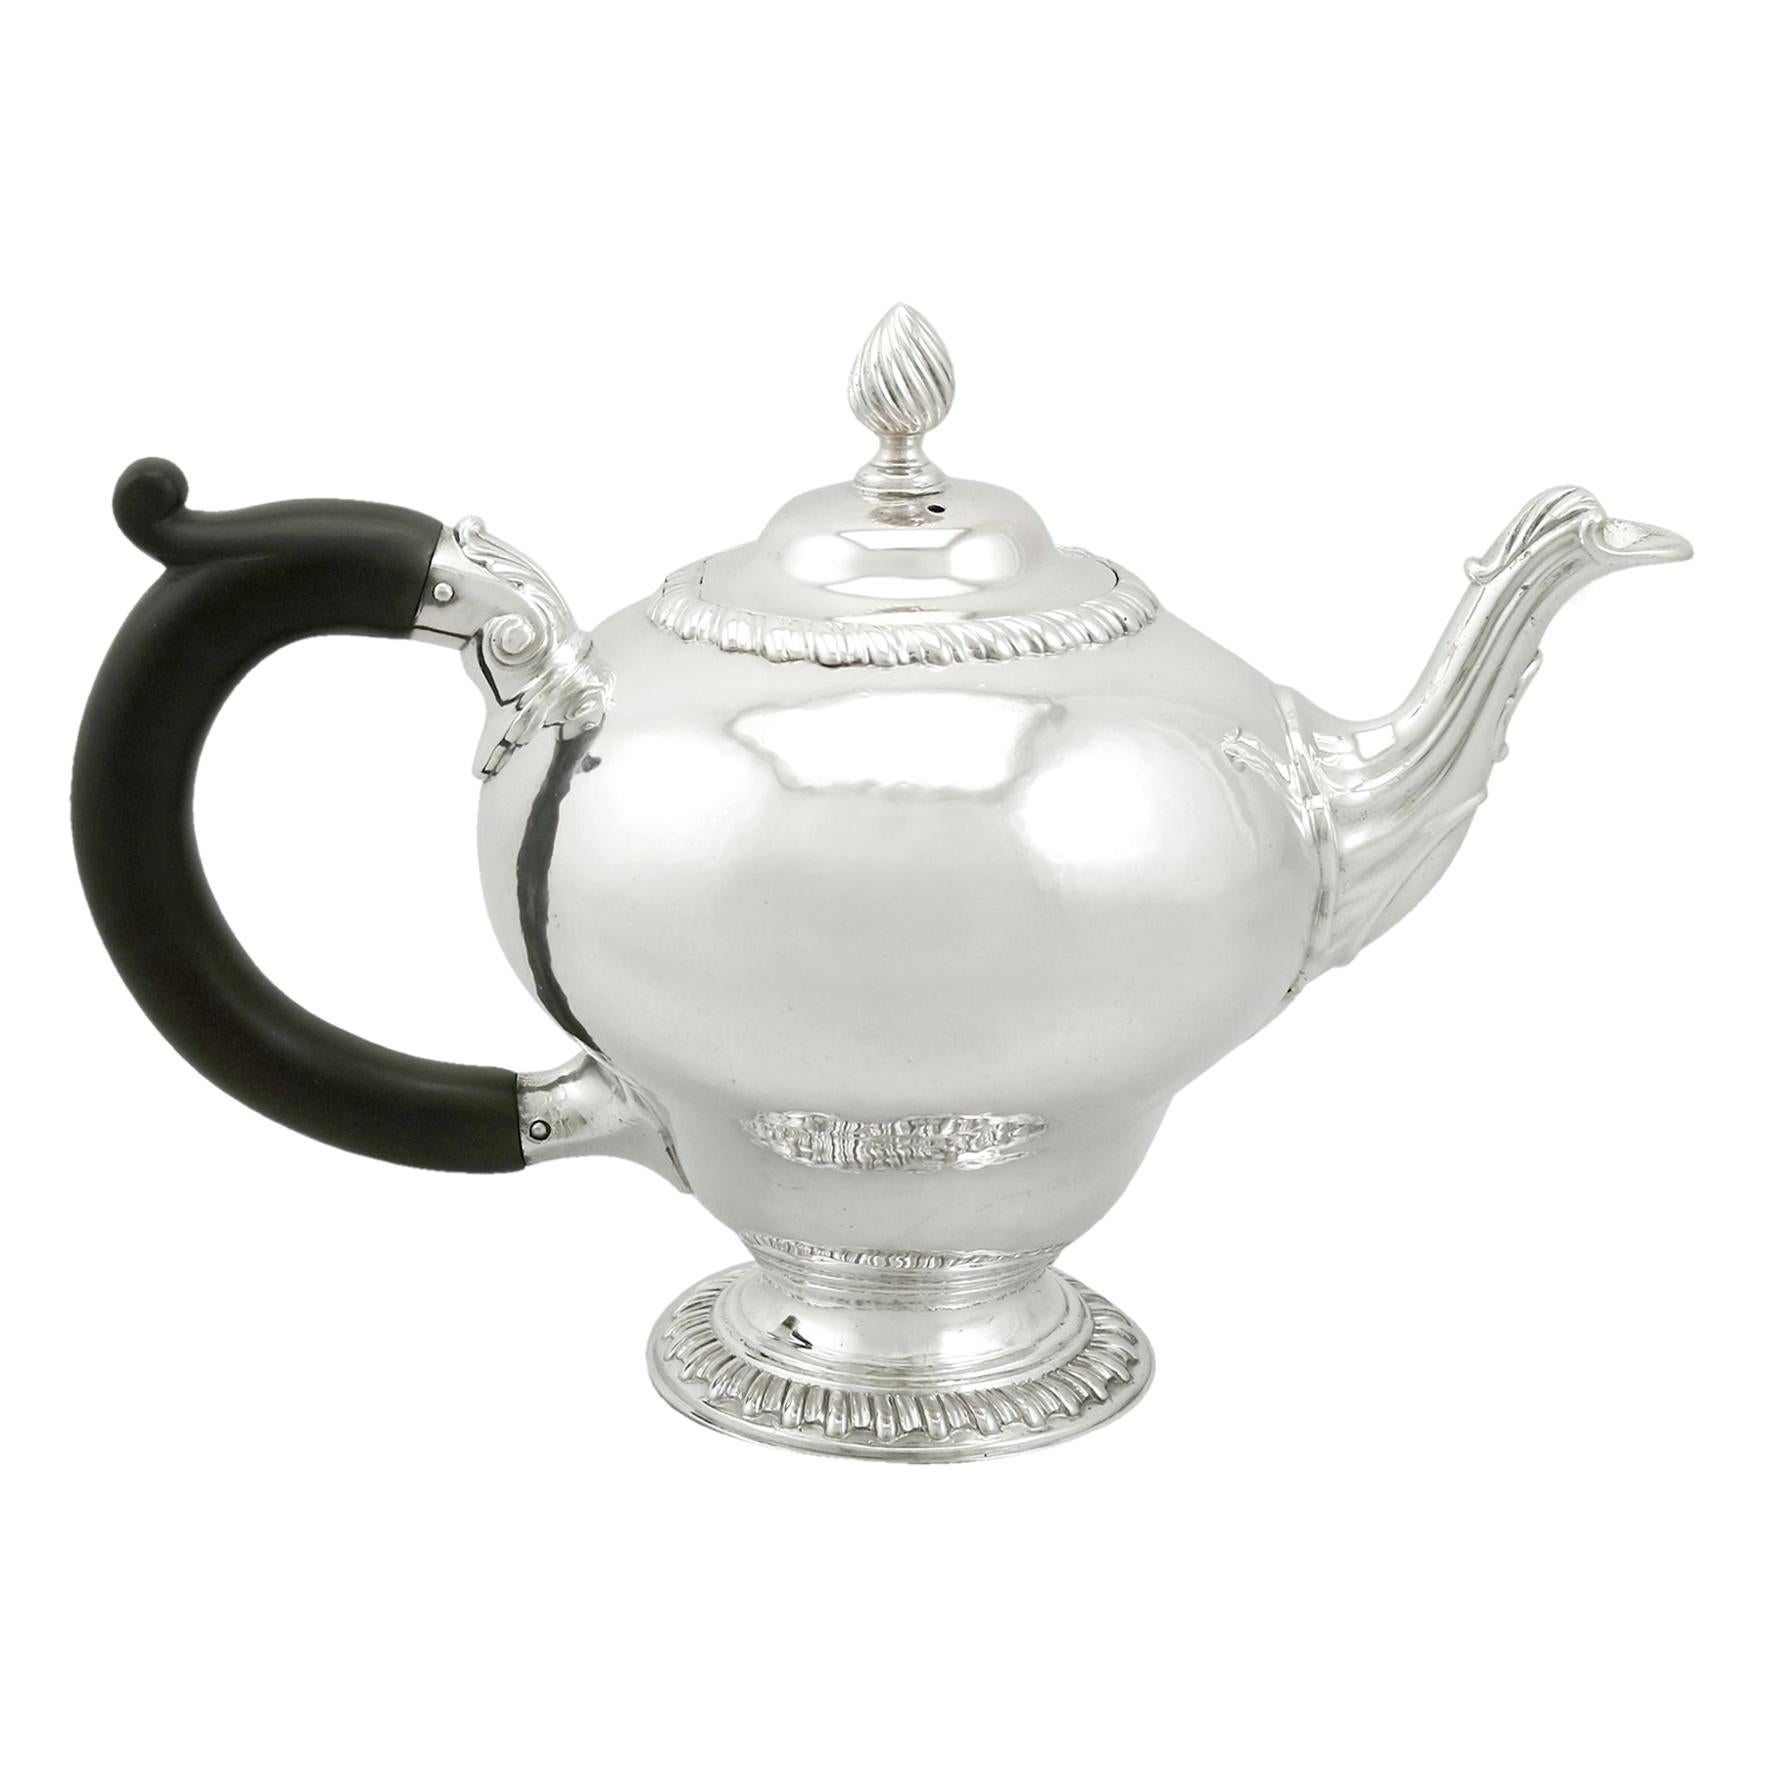 An exceptional, fine and impressive antique George III English sterling silver bachelor teapot; an addition to our Georgian silver teaware collection

This exceptional antique Edwardian sterling silver teapot has an inverted pear shaped form onto